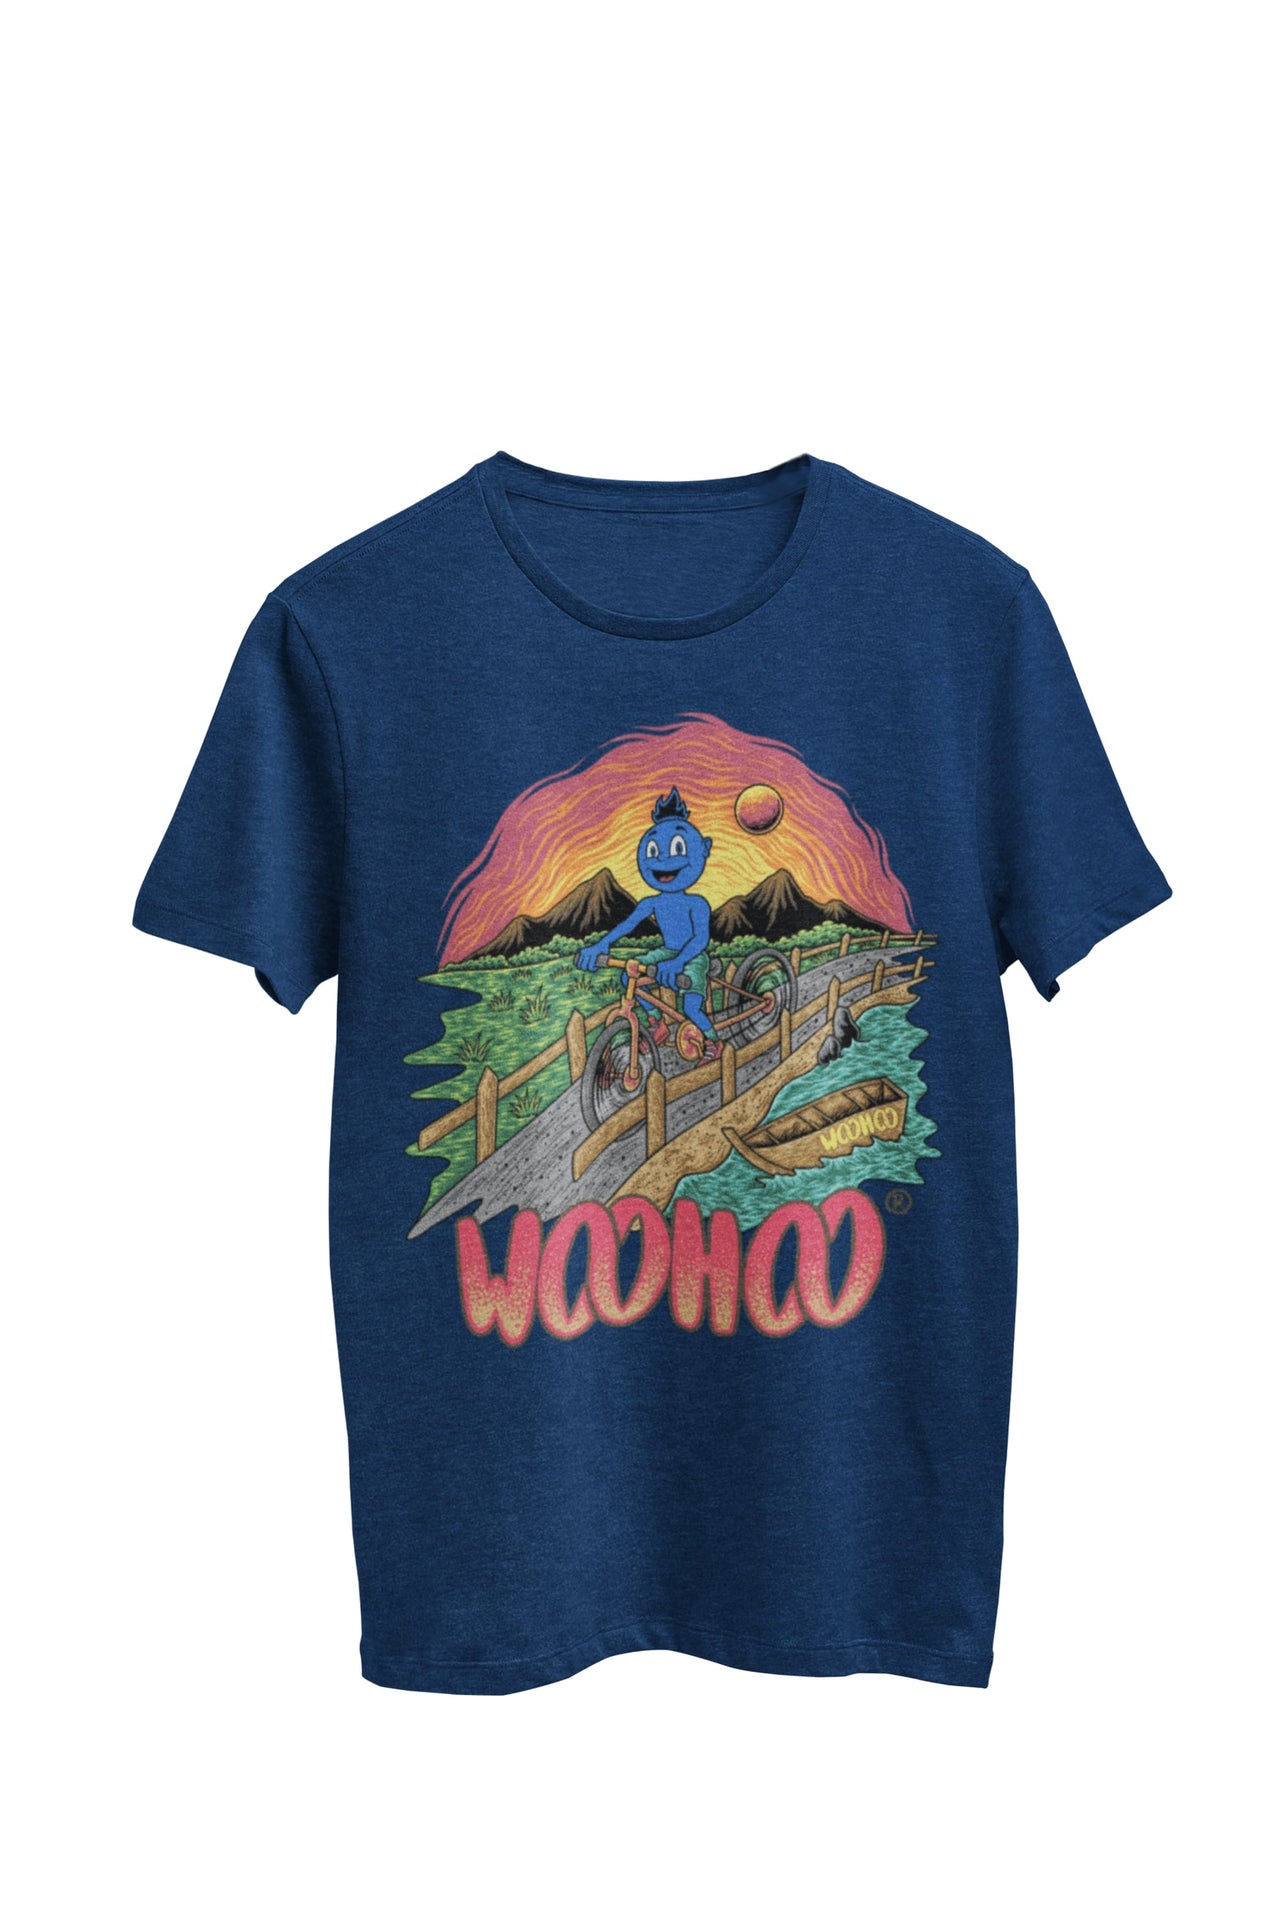 WooHooBerry casually cycling through a scenic natural landscape, embodying the relaxed and carefree essence of outdoor sports. This navy T-shirt proudly bears the text 'WooHoo,' adding a touch of spirited enjoyment to the leisurely activity